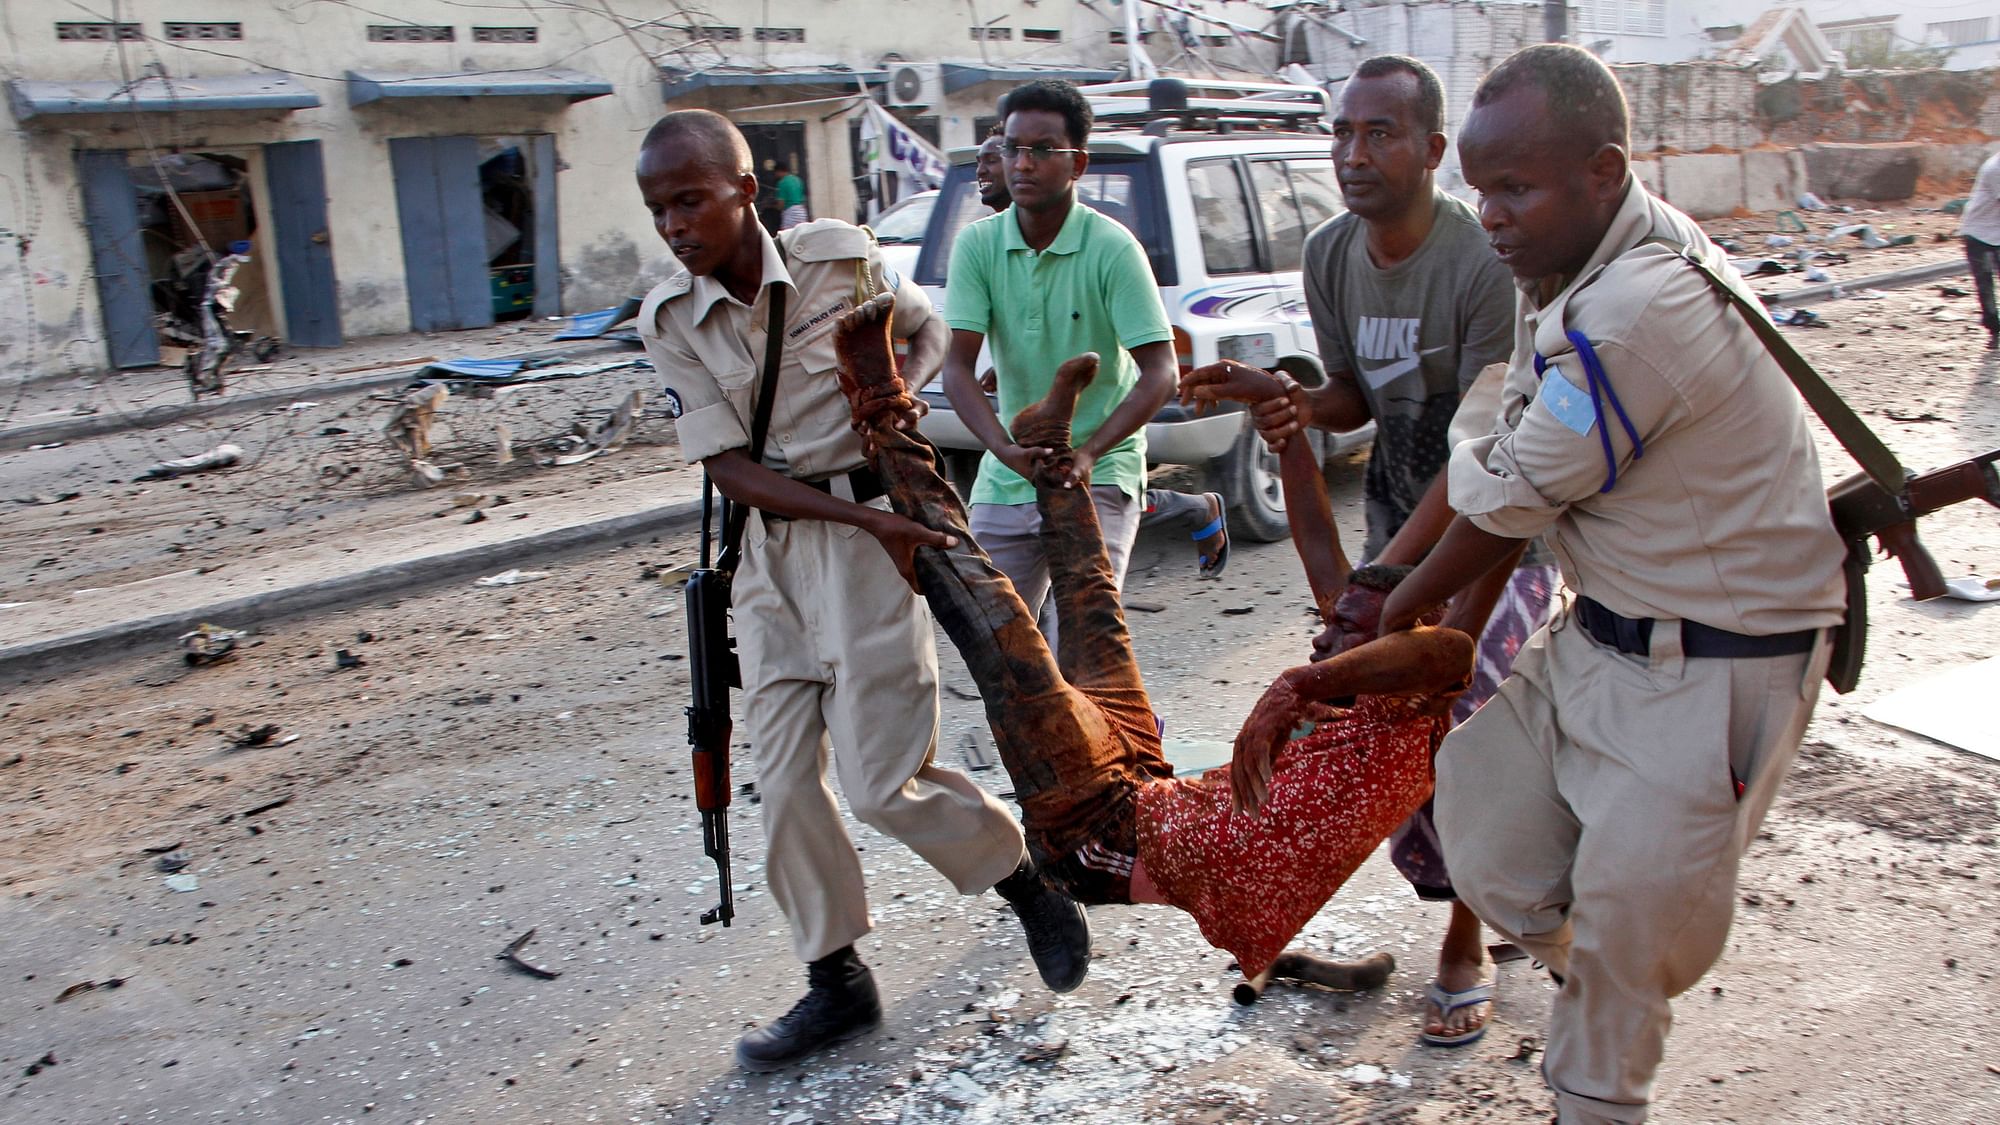 Rescuers carry a man severely injured in the car bombs that went off in Mogadishu on Friday, 9 November.